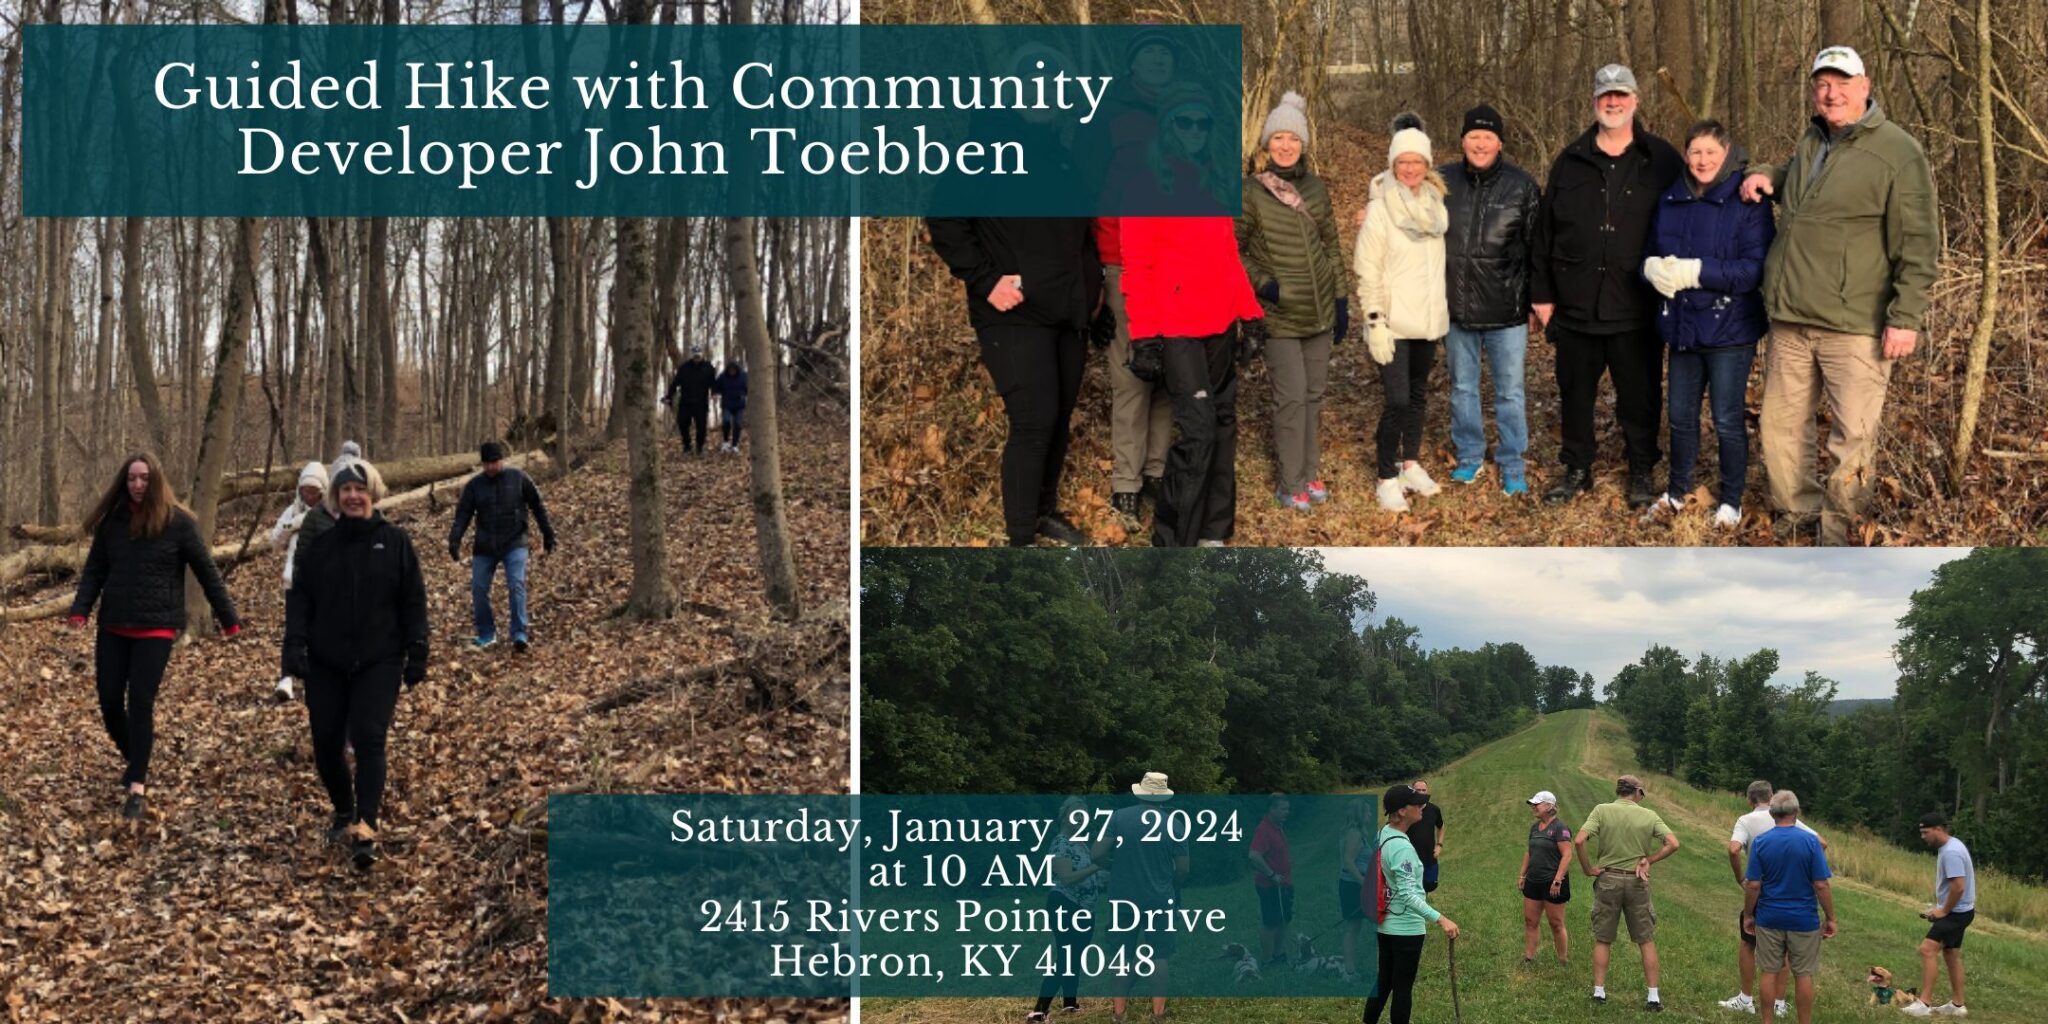 Guided Hike with Community Developer - January 27, 2024